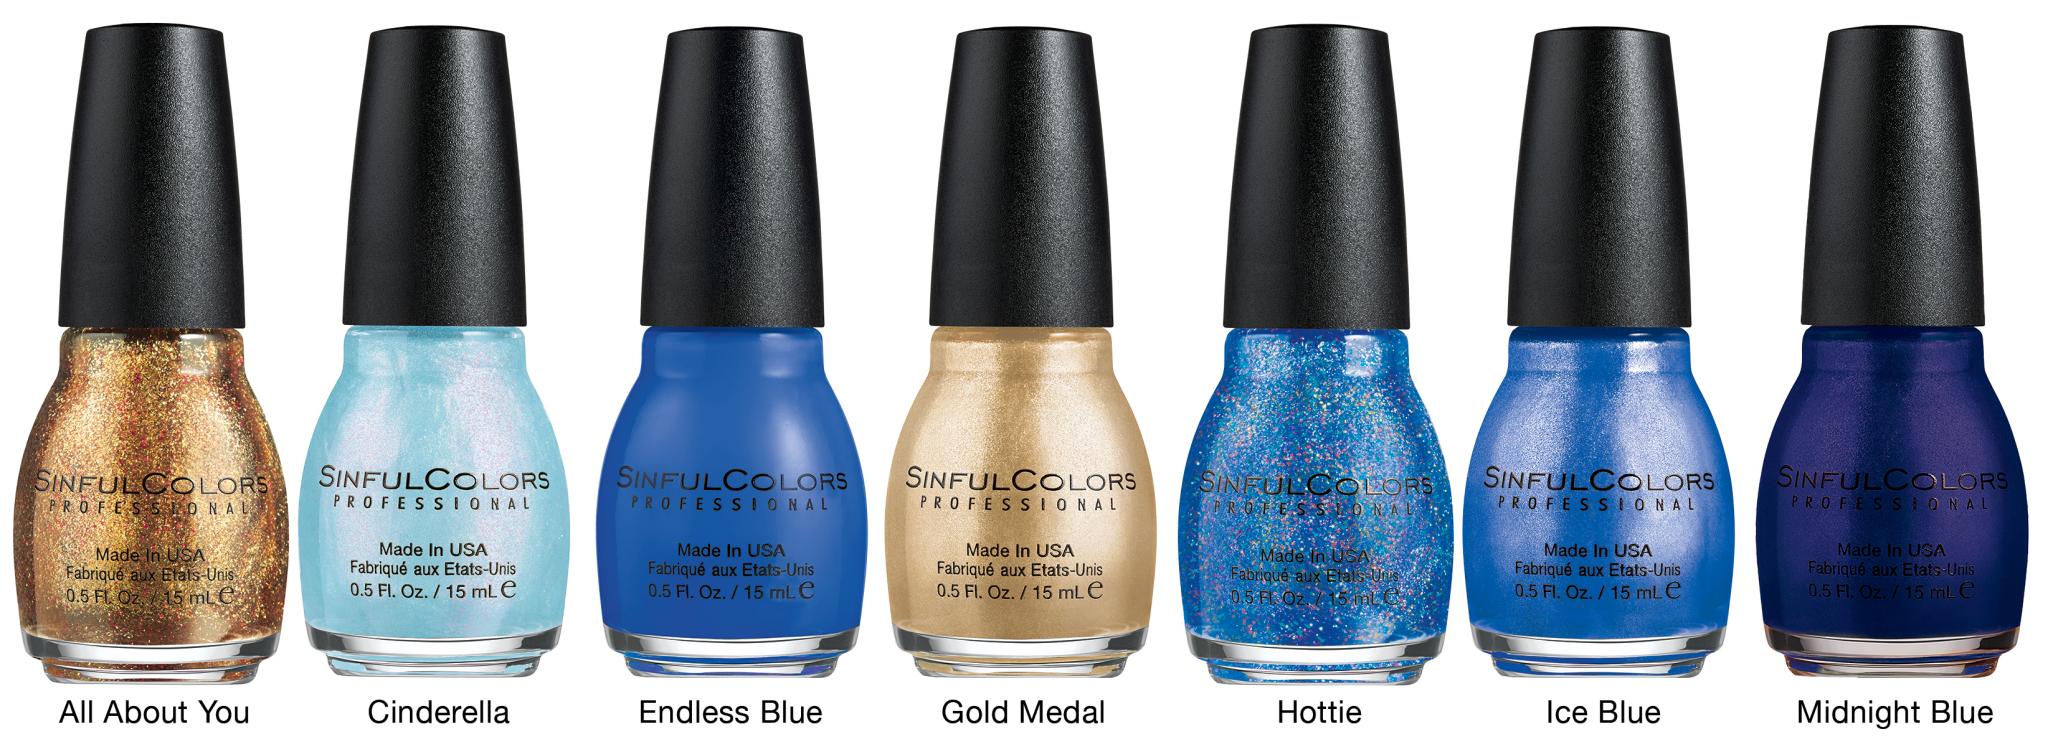 6 Metallic and Sparkled Nail Polishes For NYE